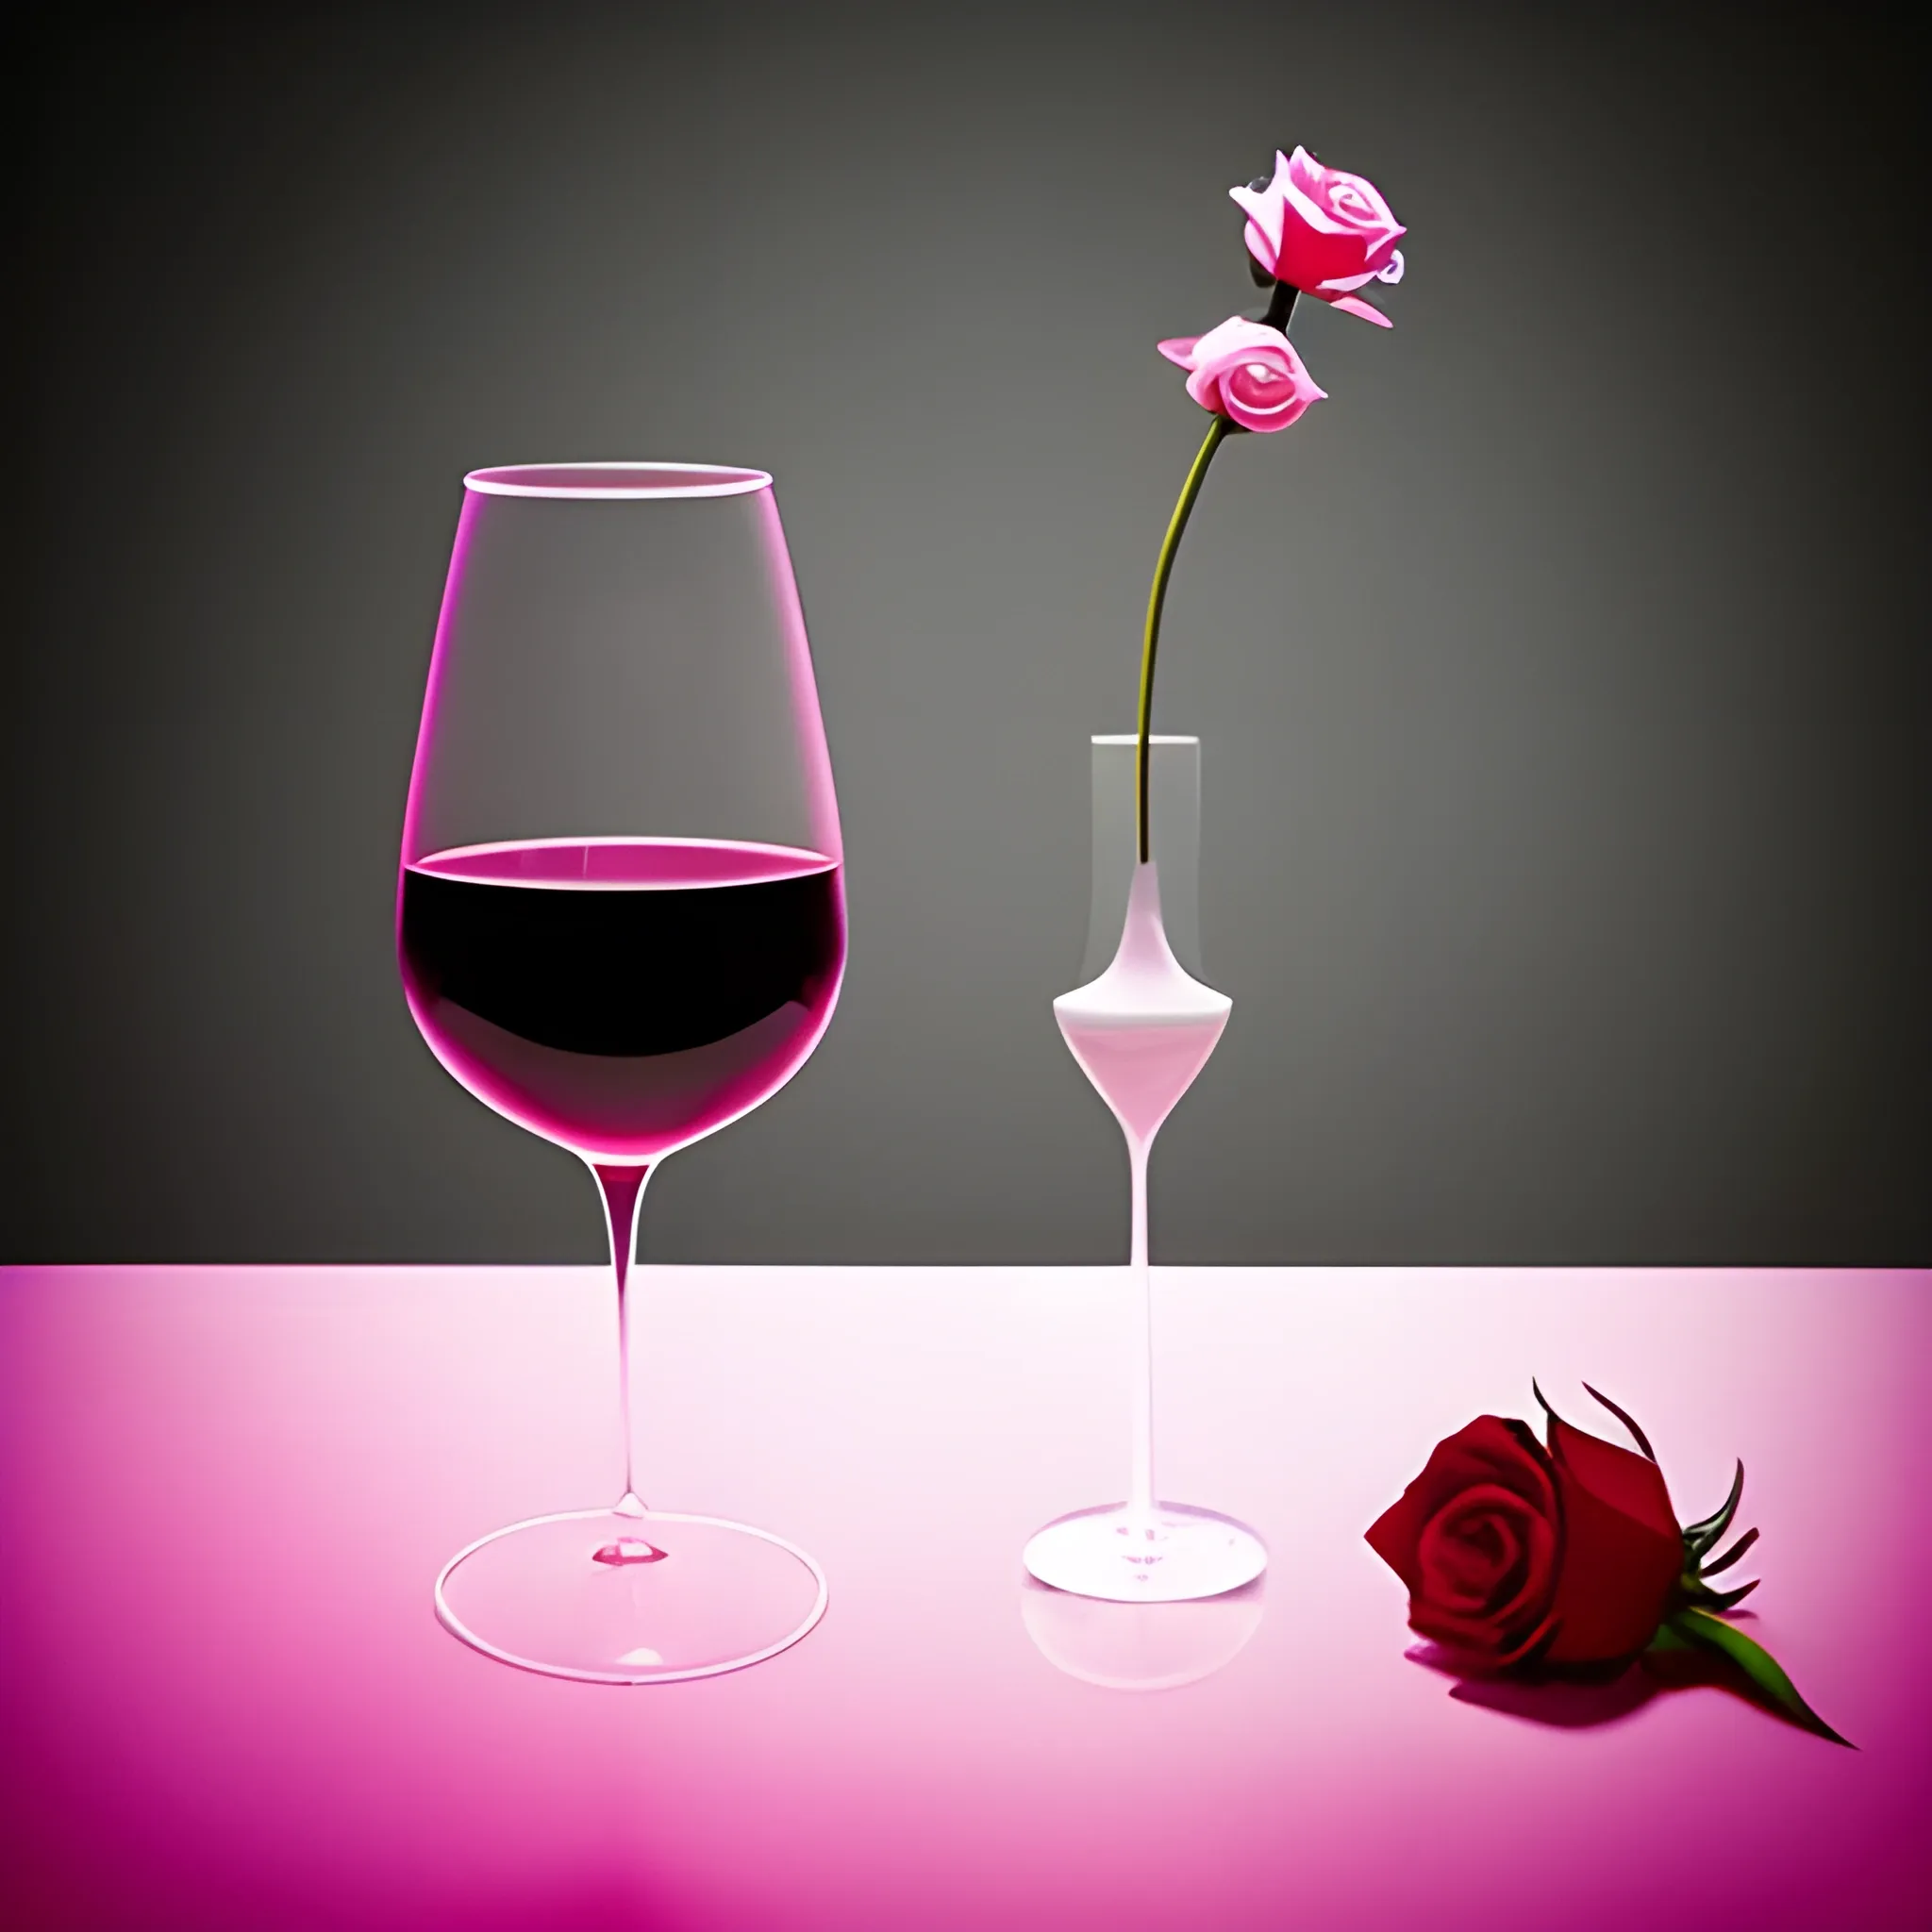 minimilist aesthetic art,wine poring in the glass,on the table ,with a red rose, and  a pink gun
